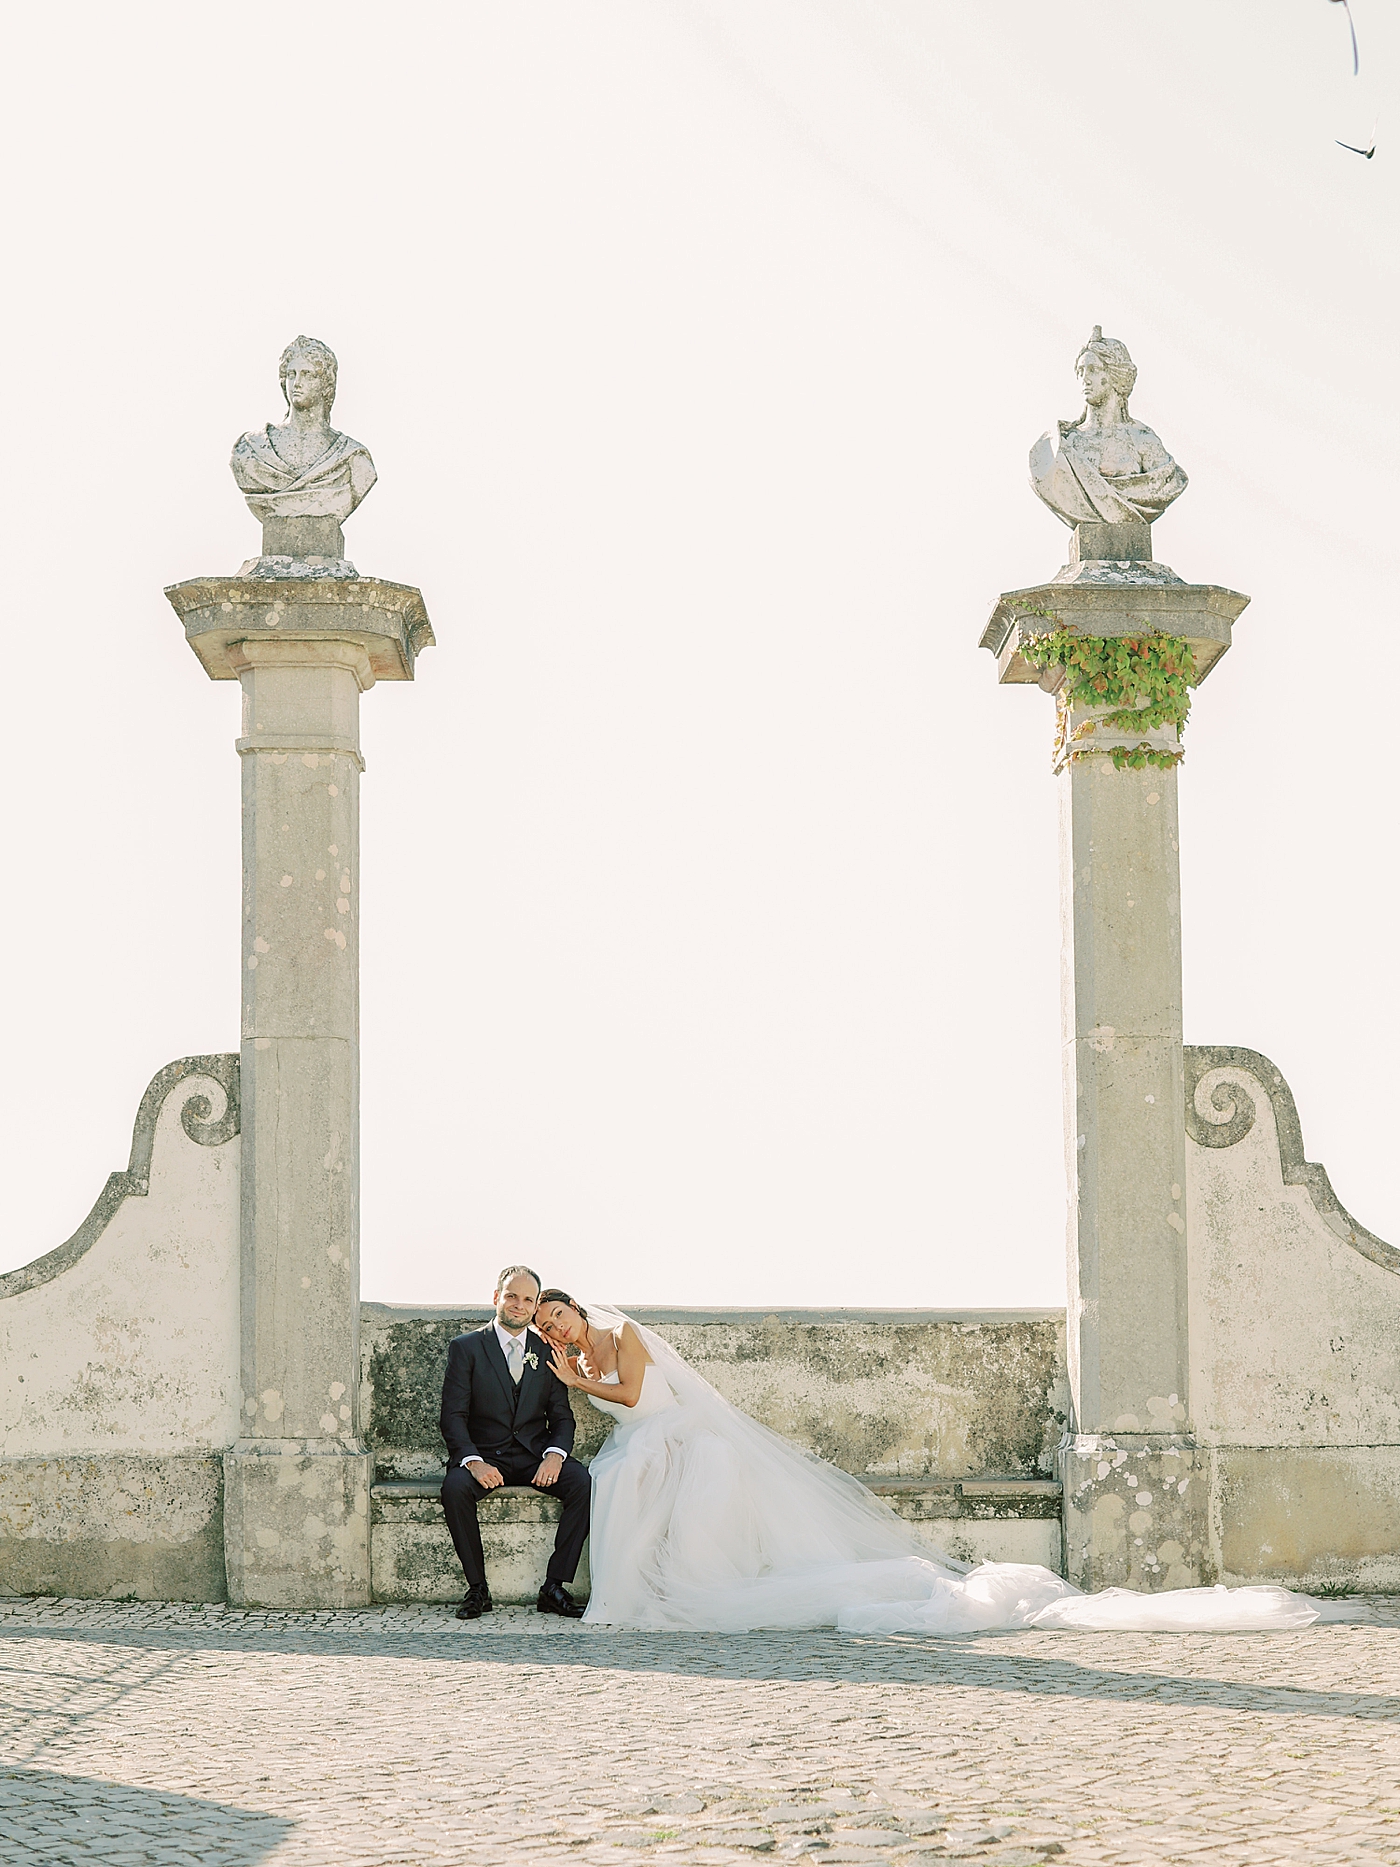 Bride and groom sitting near a wall | Image by Diane Sotero Photography